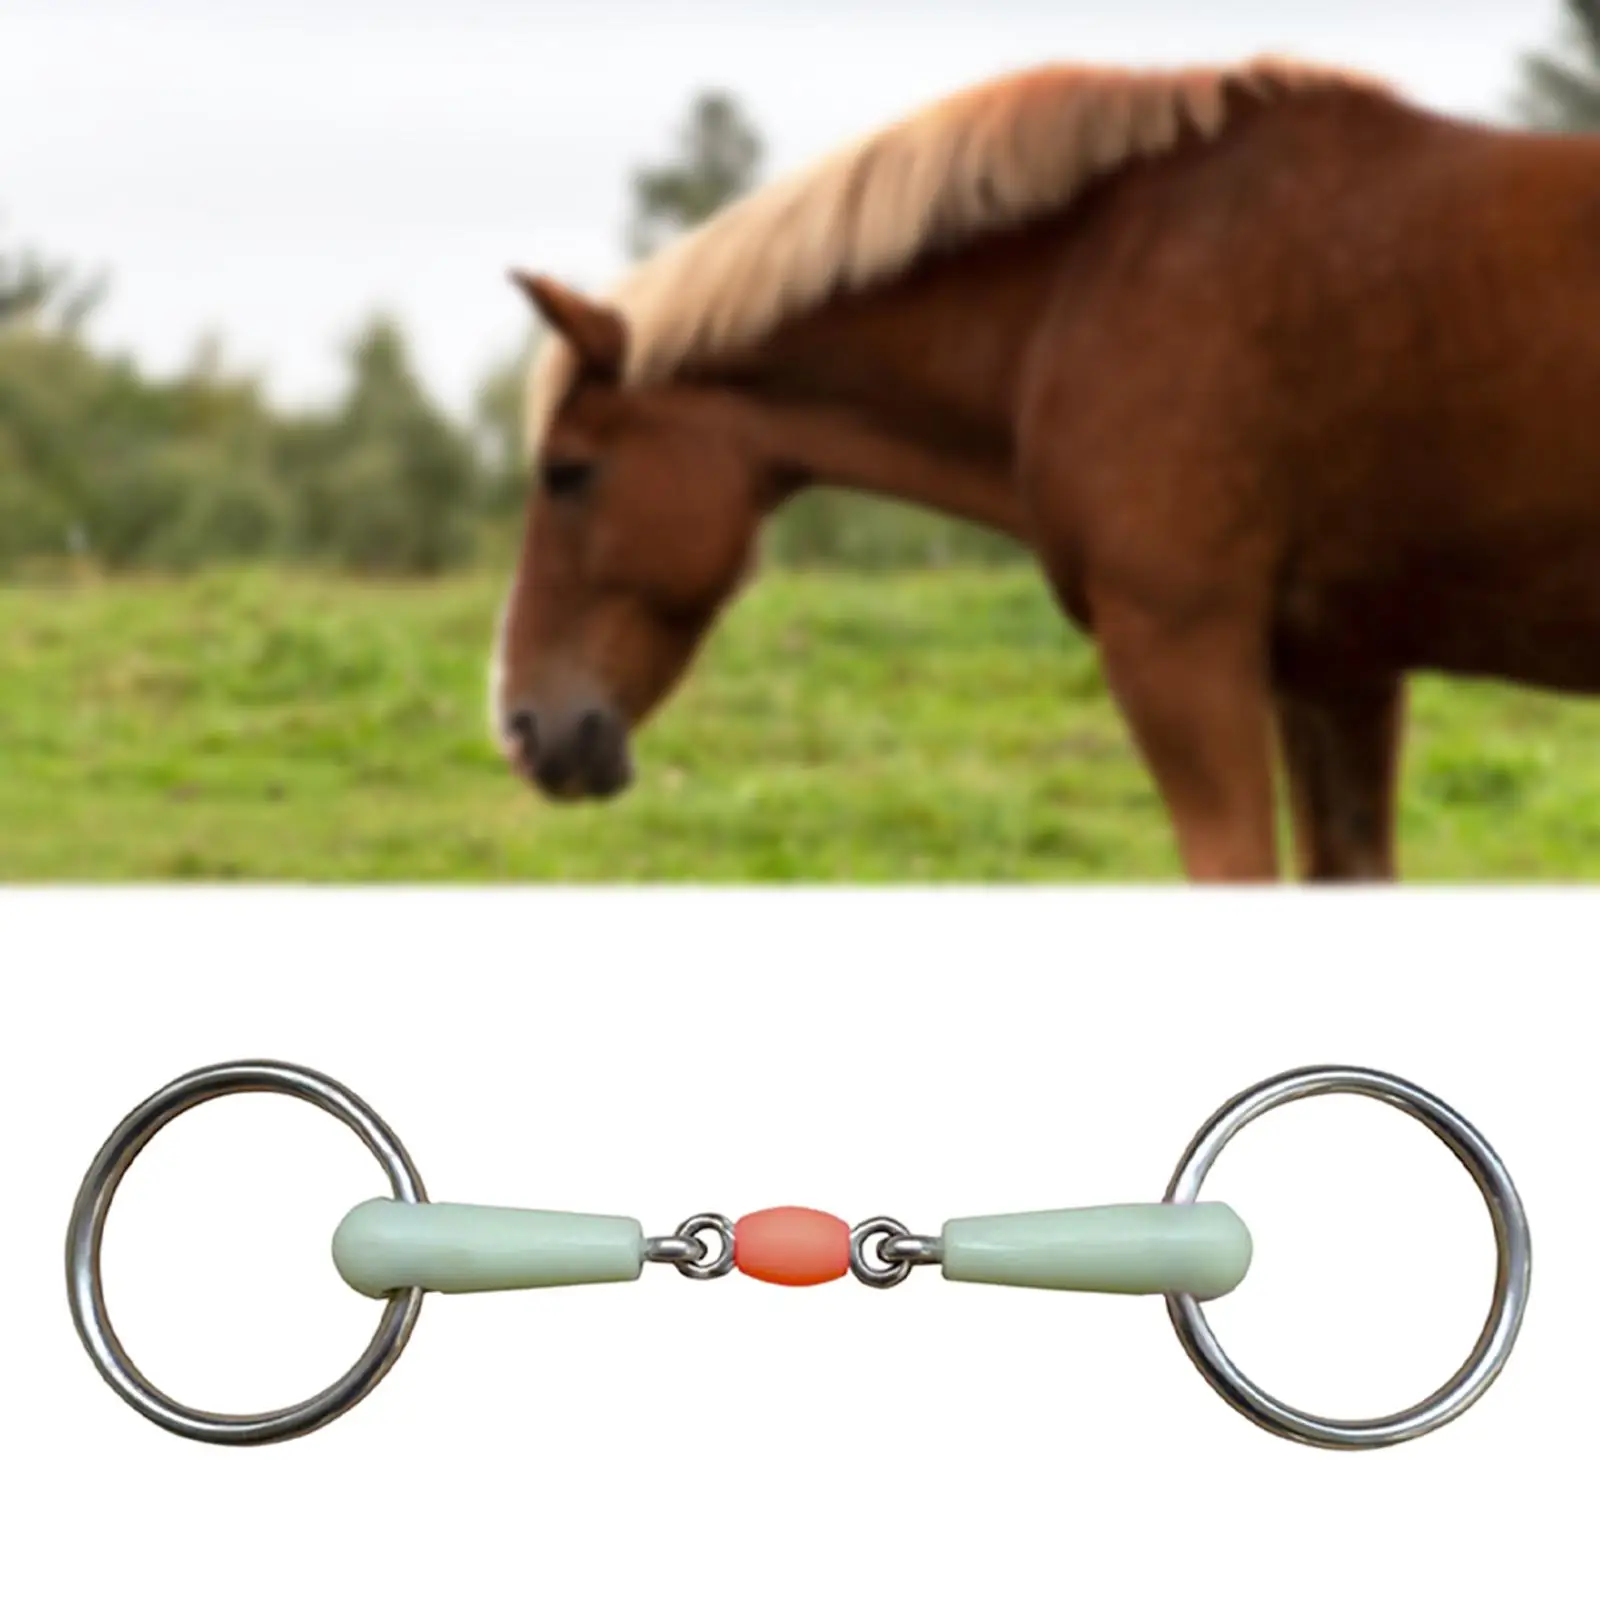 Horse Mouth Bit Harness Flavor Jointed Mouth Stainless Steel Round for Training Cheek Horse Chewing Horse Bridle